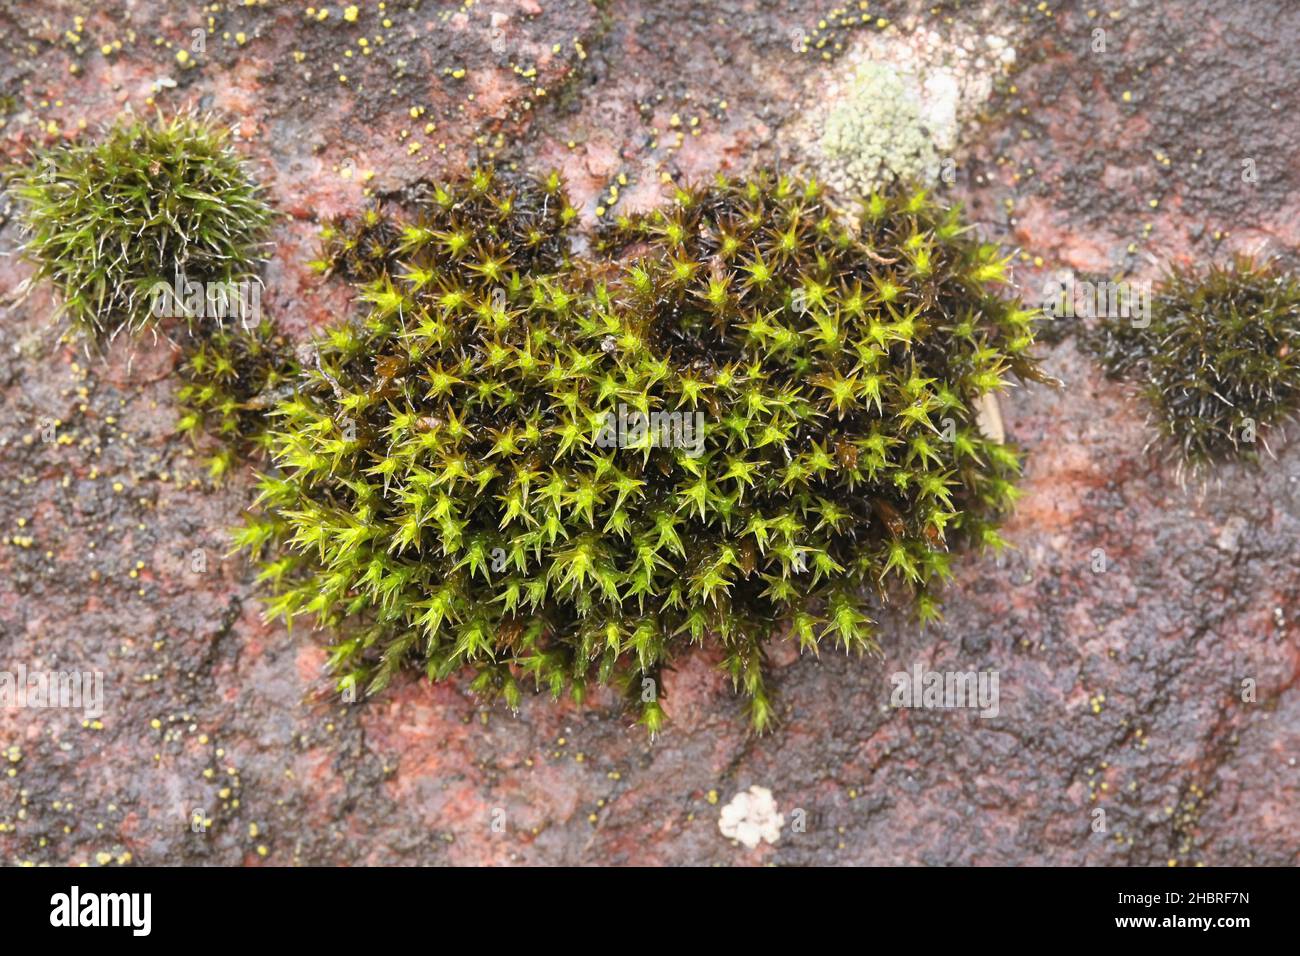 Andreaea rupestris, commonly known as black rock moss or rock-moss, growing on granite rock Stock Photo